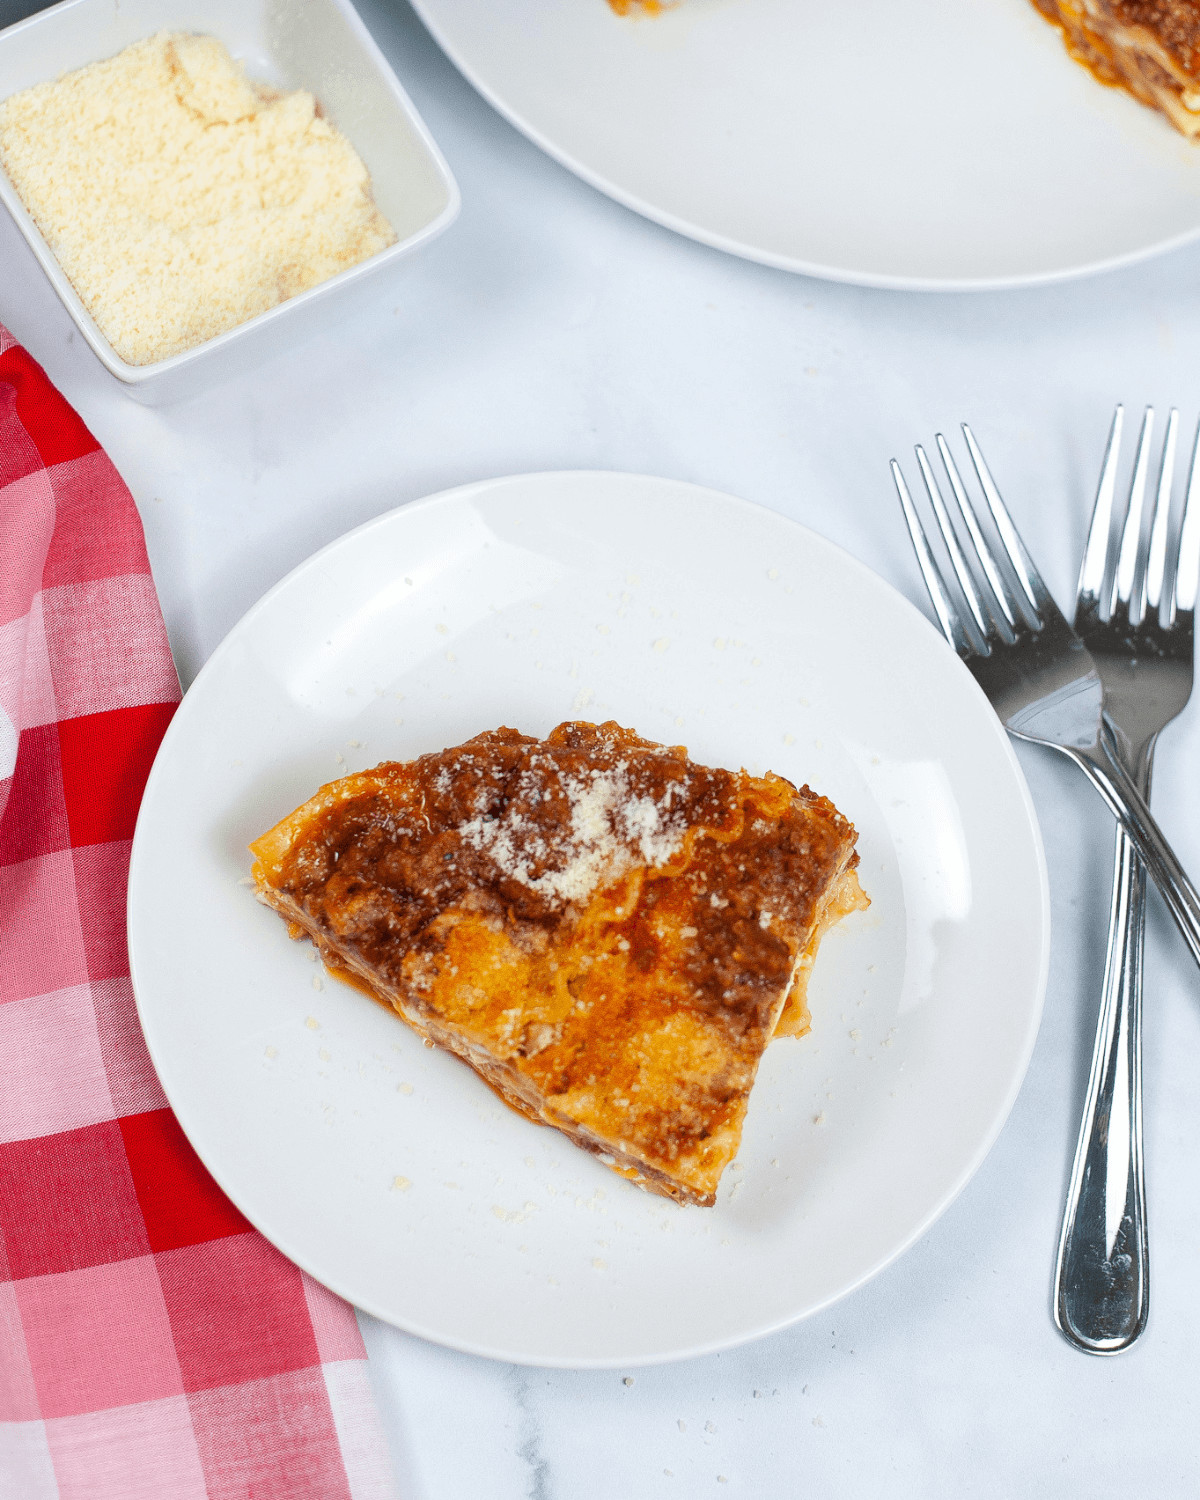 A slice of lasagna on a plate next to a fork, tempting and delicious.